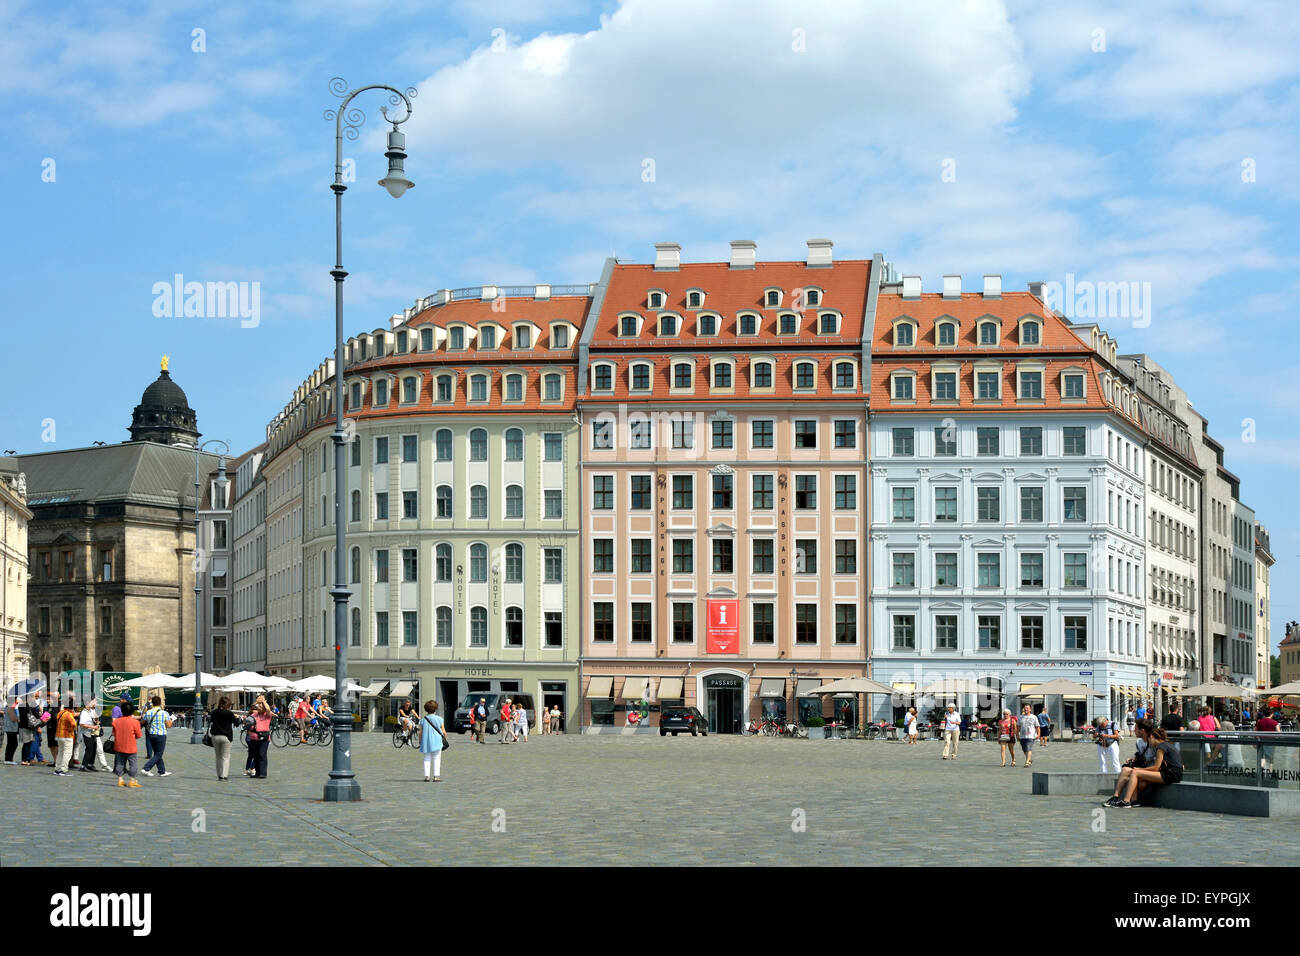 Tourists on the New Market n Dresden before the townhouses. Stock Photo